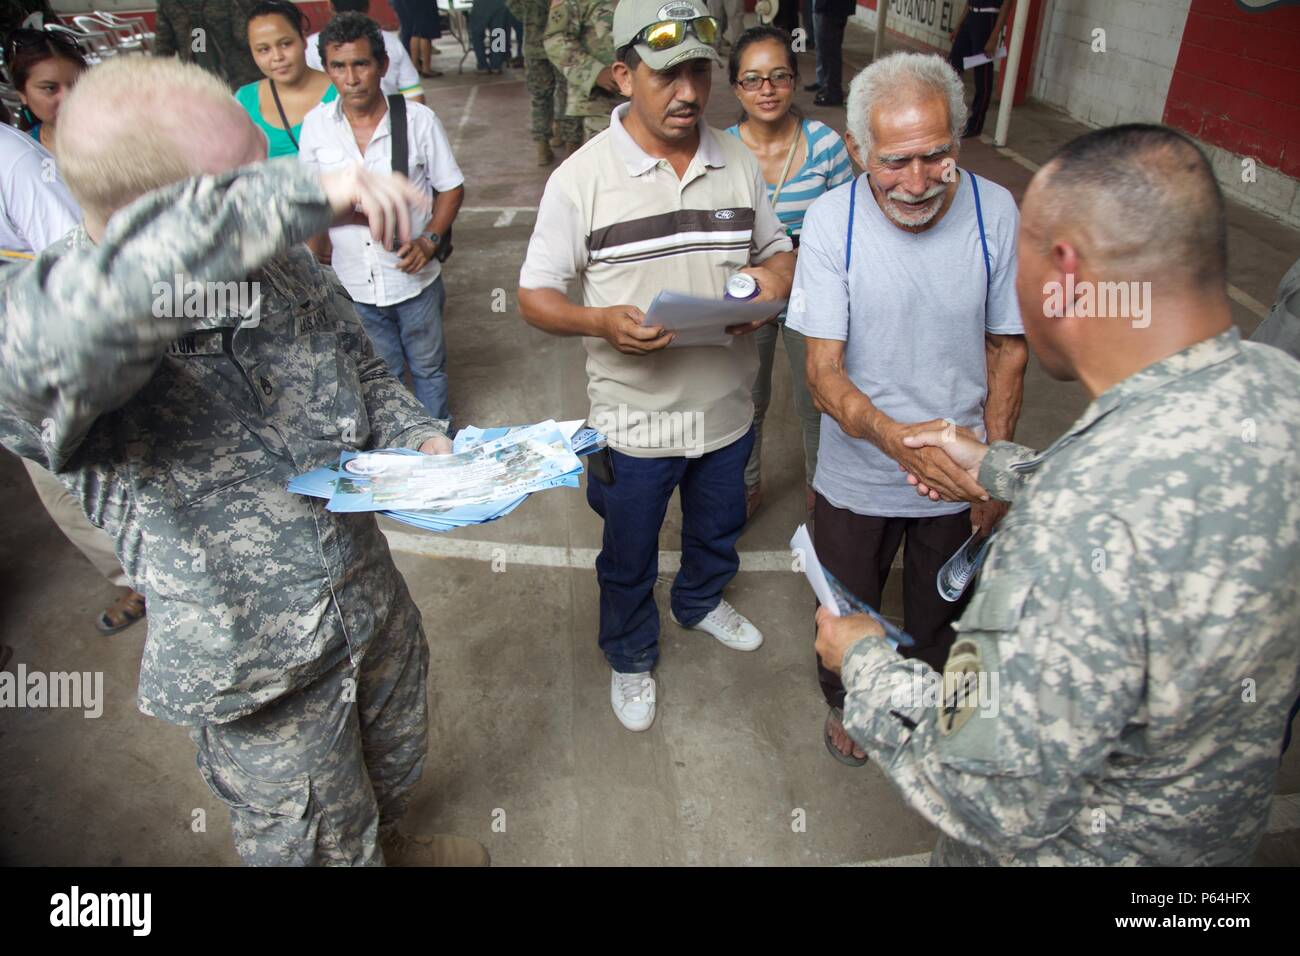 Sgt. 1st Class Luis Villarreal gives posters to the local Cocodes to advertise a future Medical Treatment Exercise as part of the Beyond The Horizon Operation at San Pedro, Guatemala, May 04, 2016. Task Force Red Wolf and Army South conducts Humanitarian Civil Assistance Training to include tactical level construction projects and Medical Readiness Training Exercises providing medical access and building schools in Guatemala with the Guatemalan Government and non-government agencies from 05MAR16 to 18JUN16 in order to improve the mission readiness of US forces and to provide a lasting benefit  Stock Photo